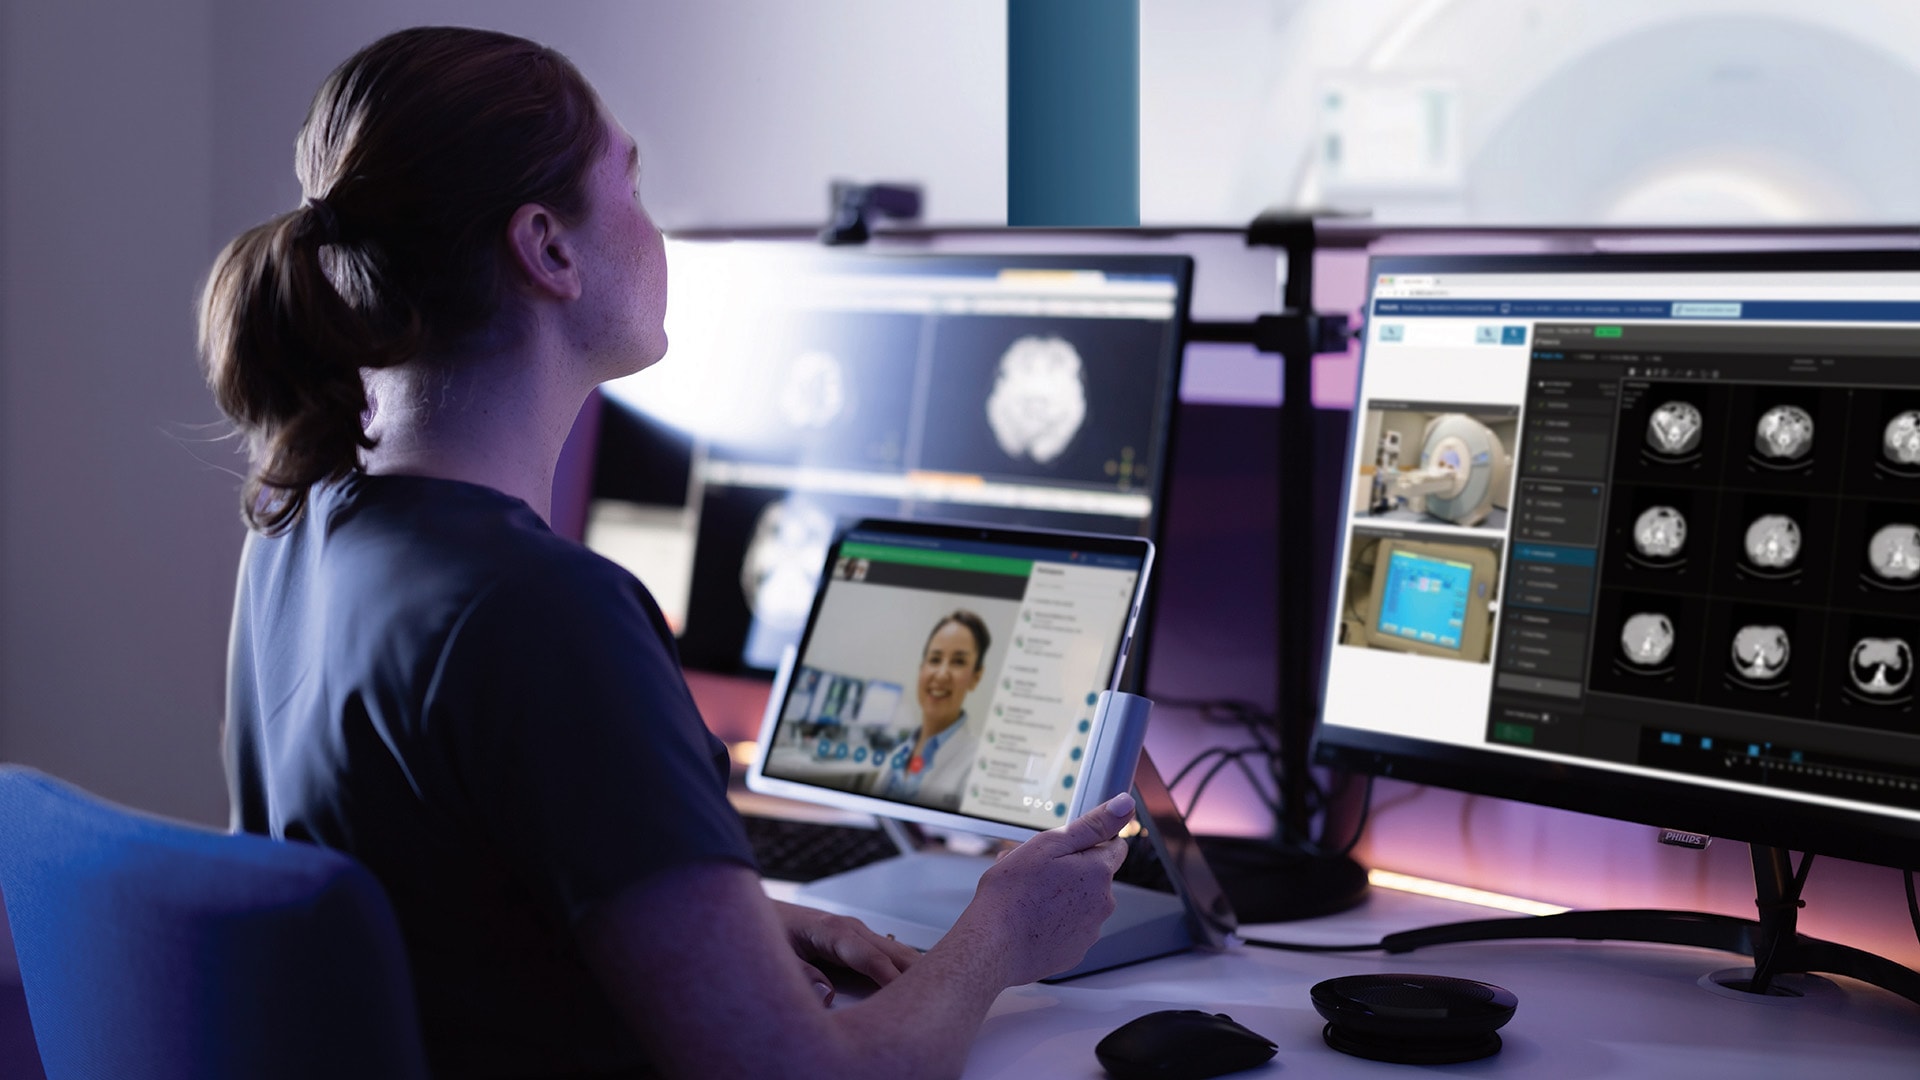 A radiology technologist receiving virtual guidance from a colleague in a central hub while acquiring a scan